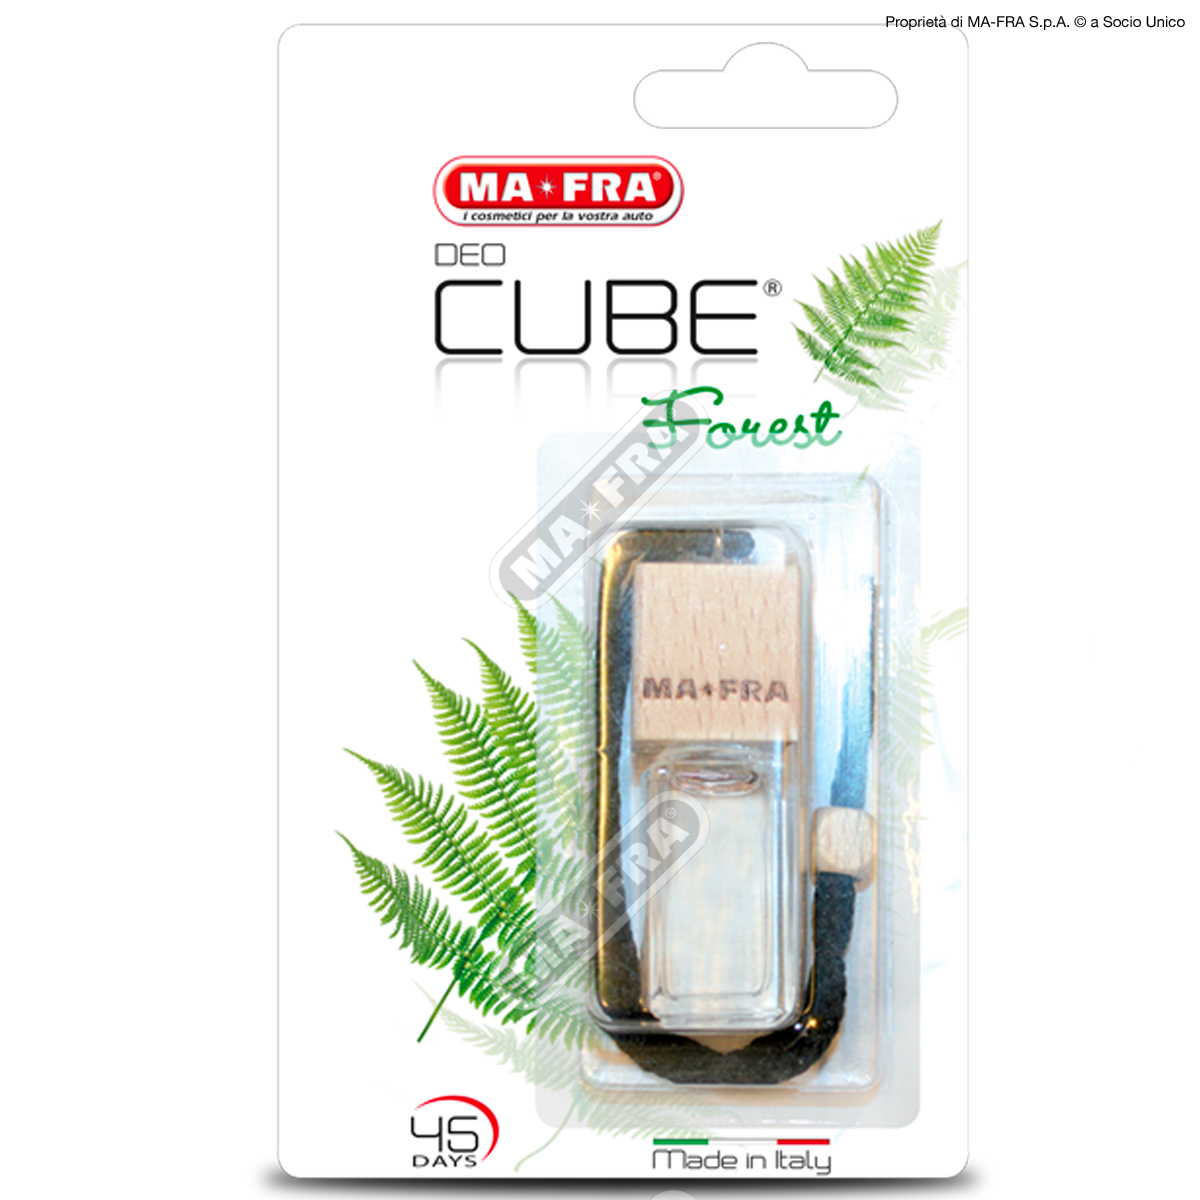 DEO CUBE FOREST